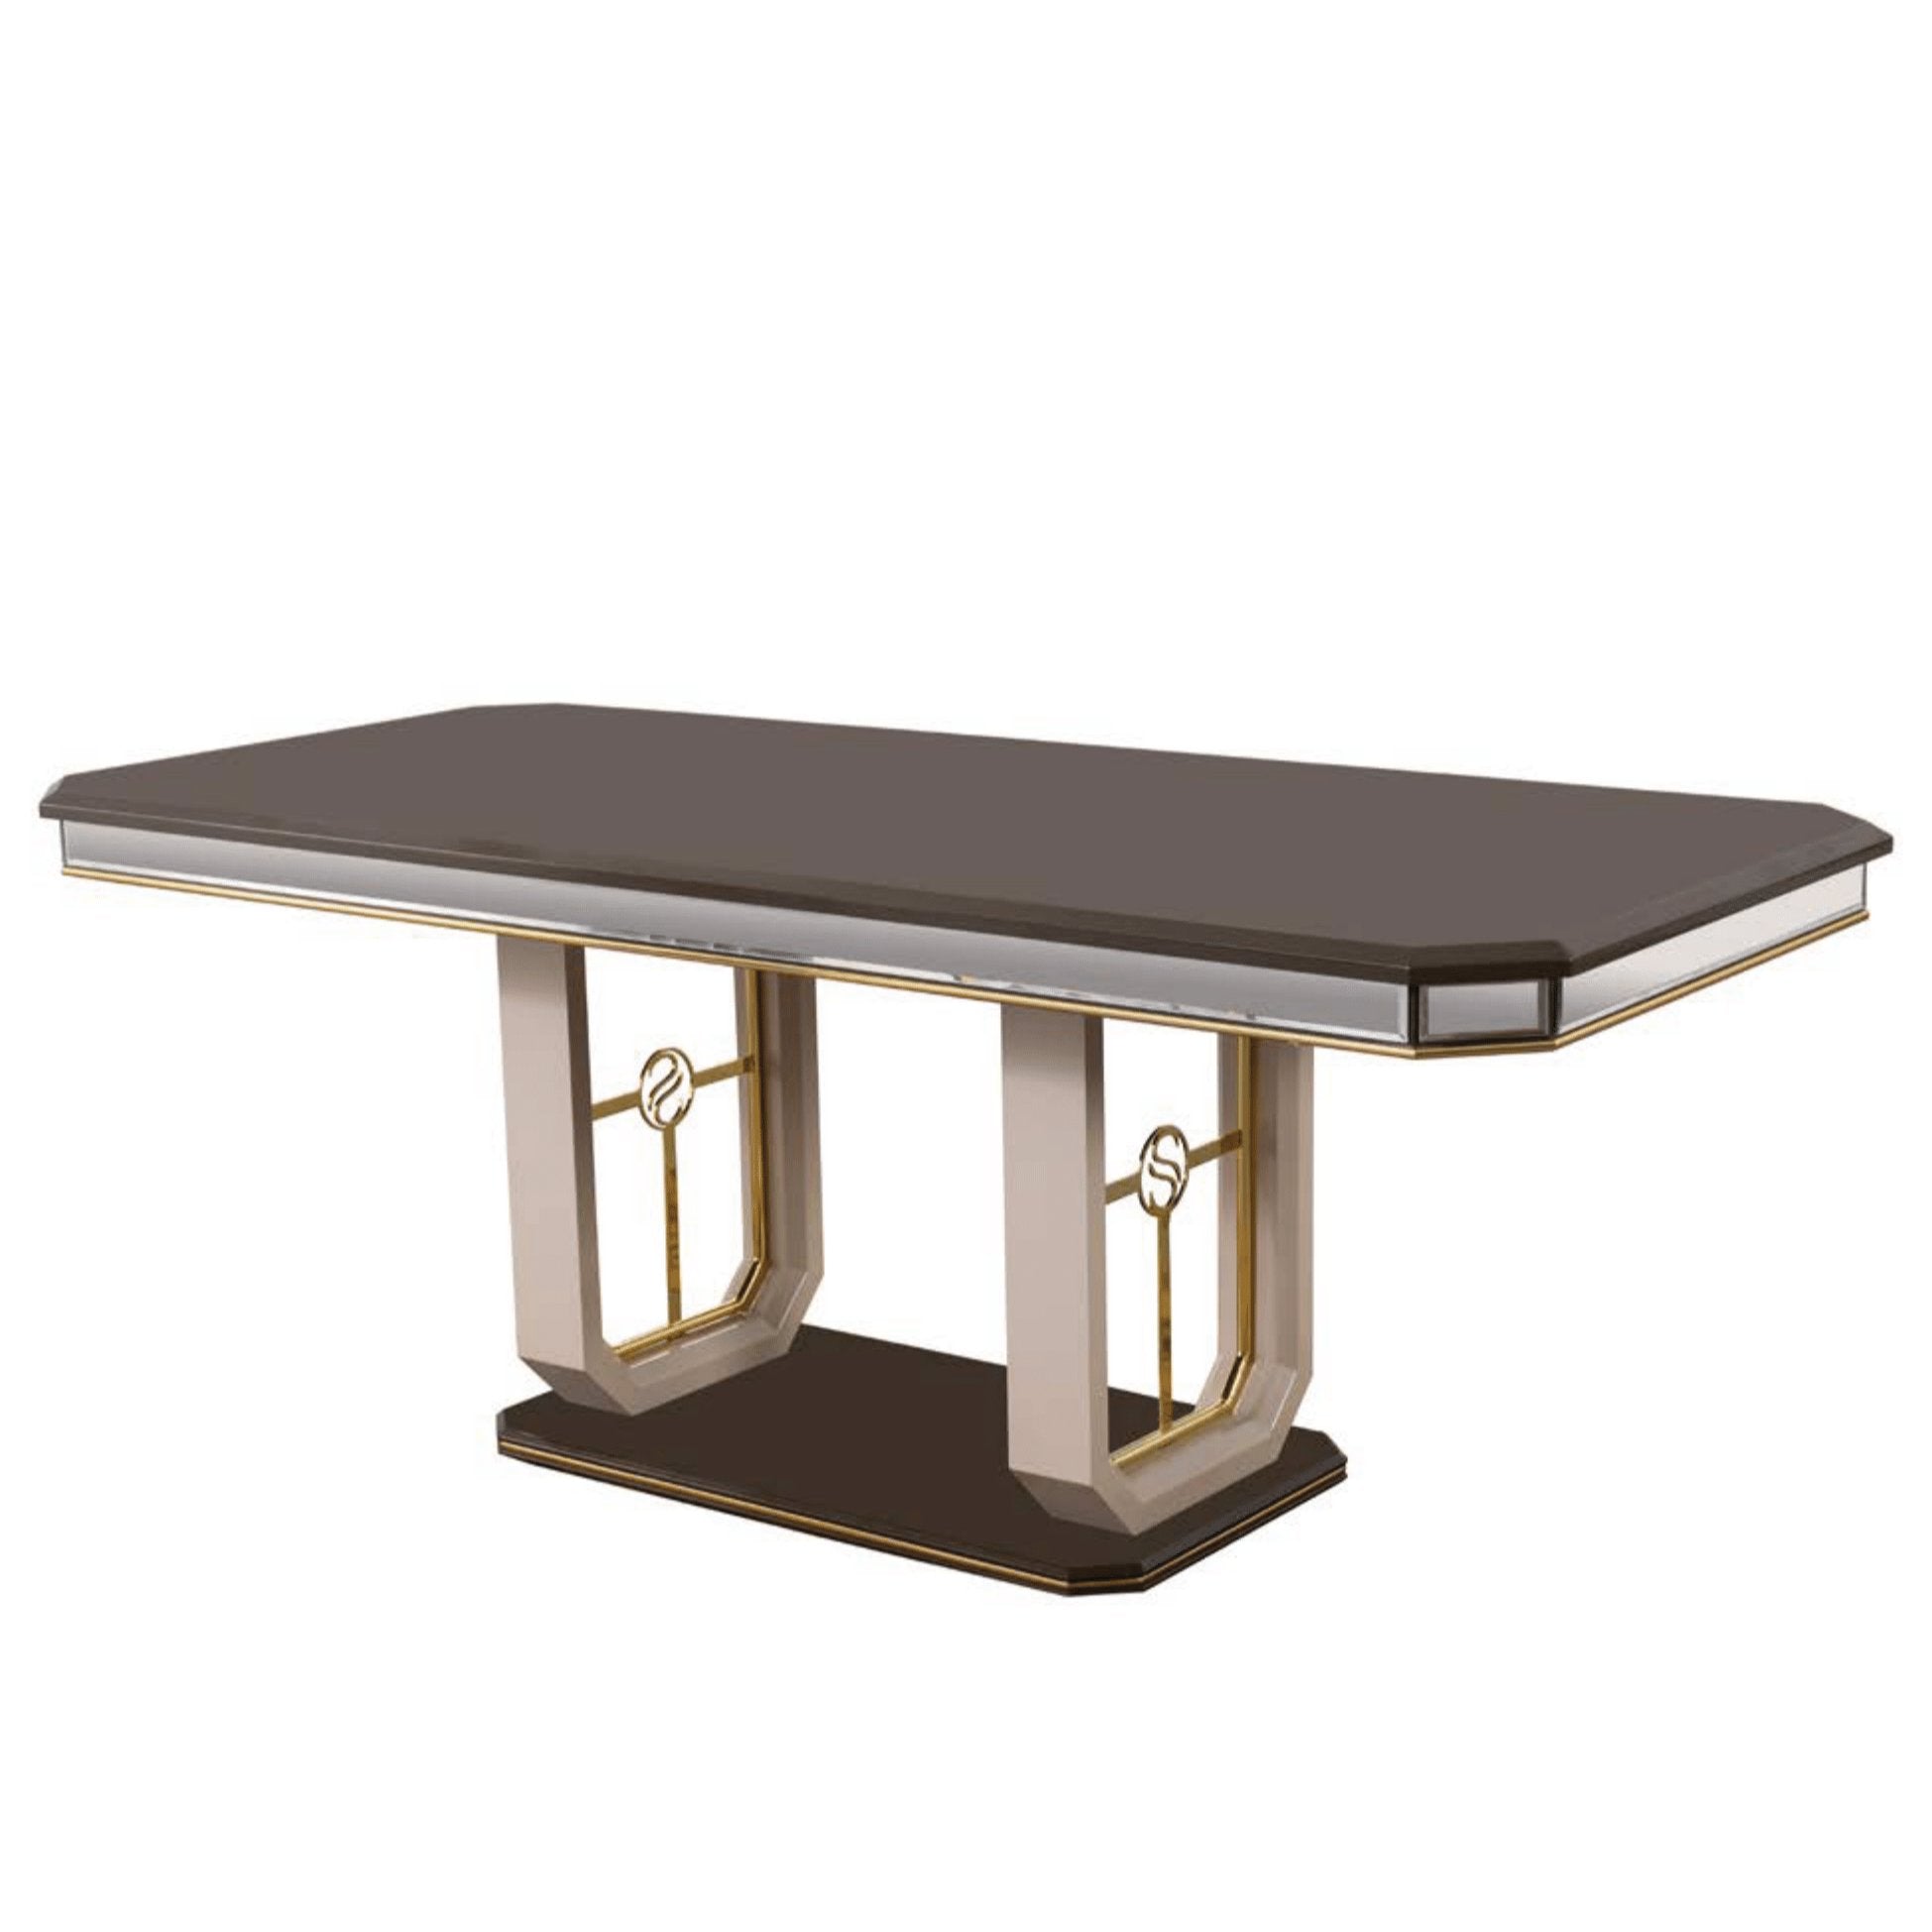 IZMIR Dining Table Dining Table